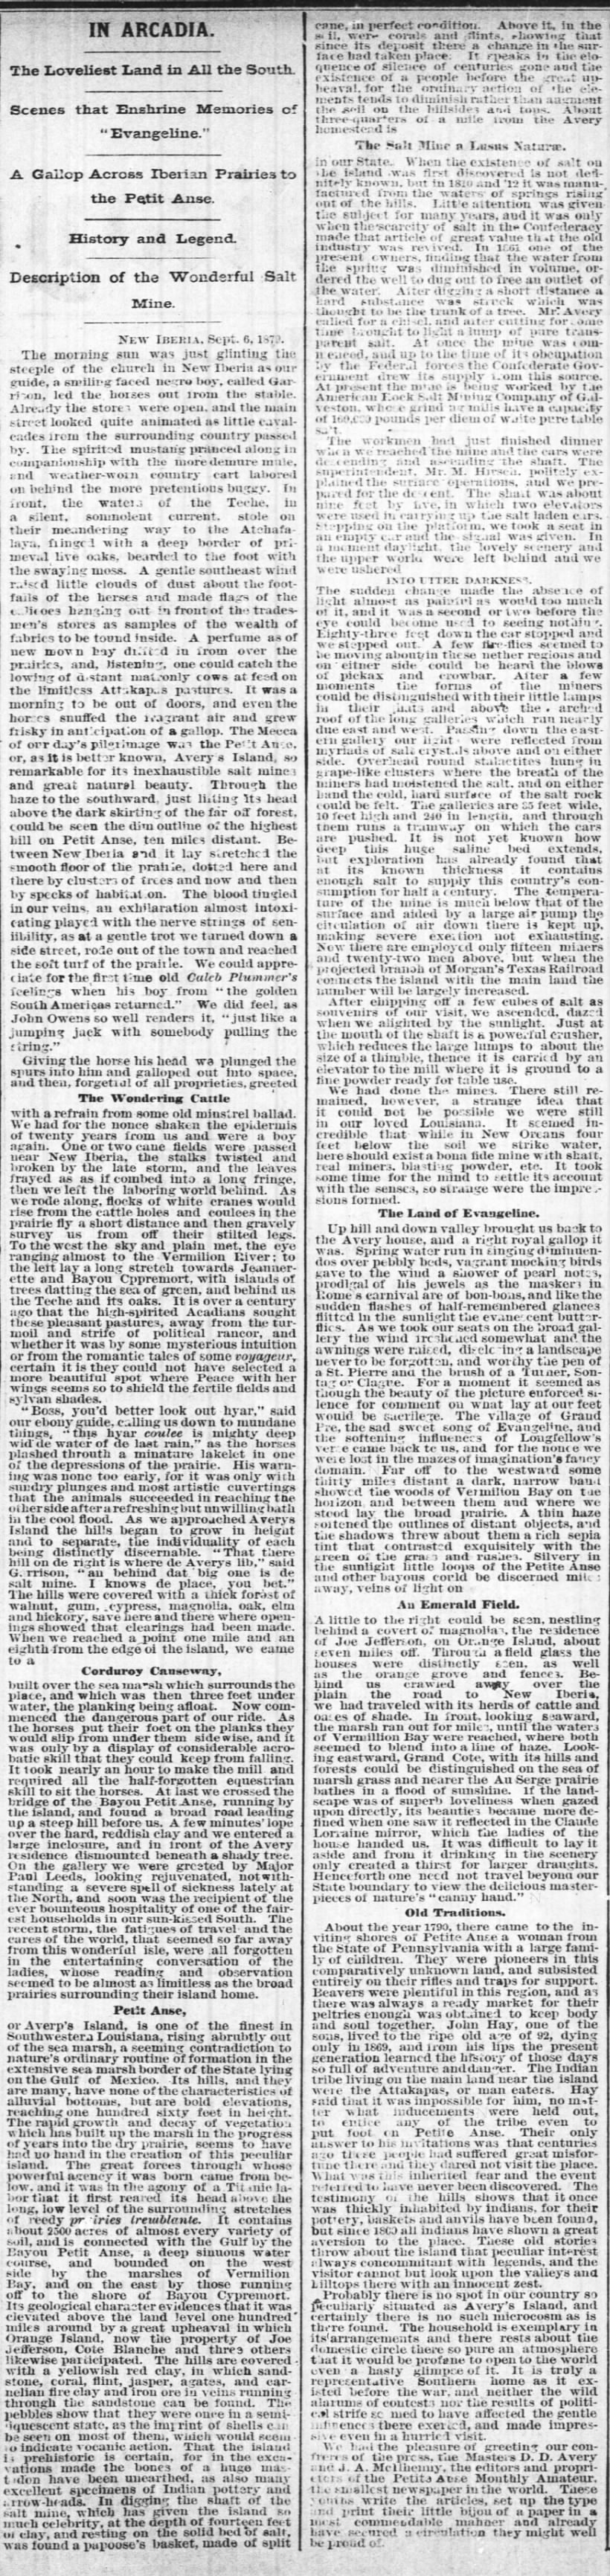 The Times-Picayune (New Orleans) Sept. 8, 1879